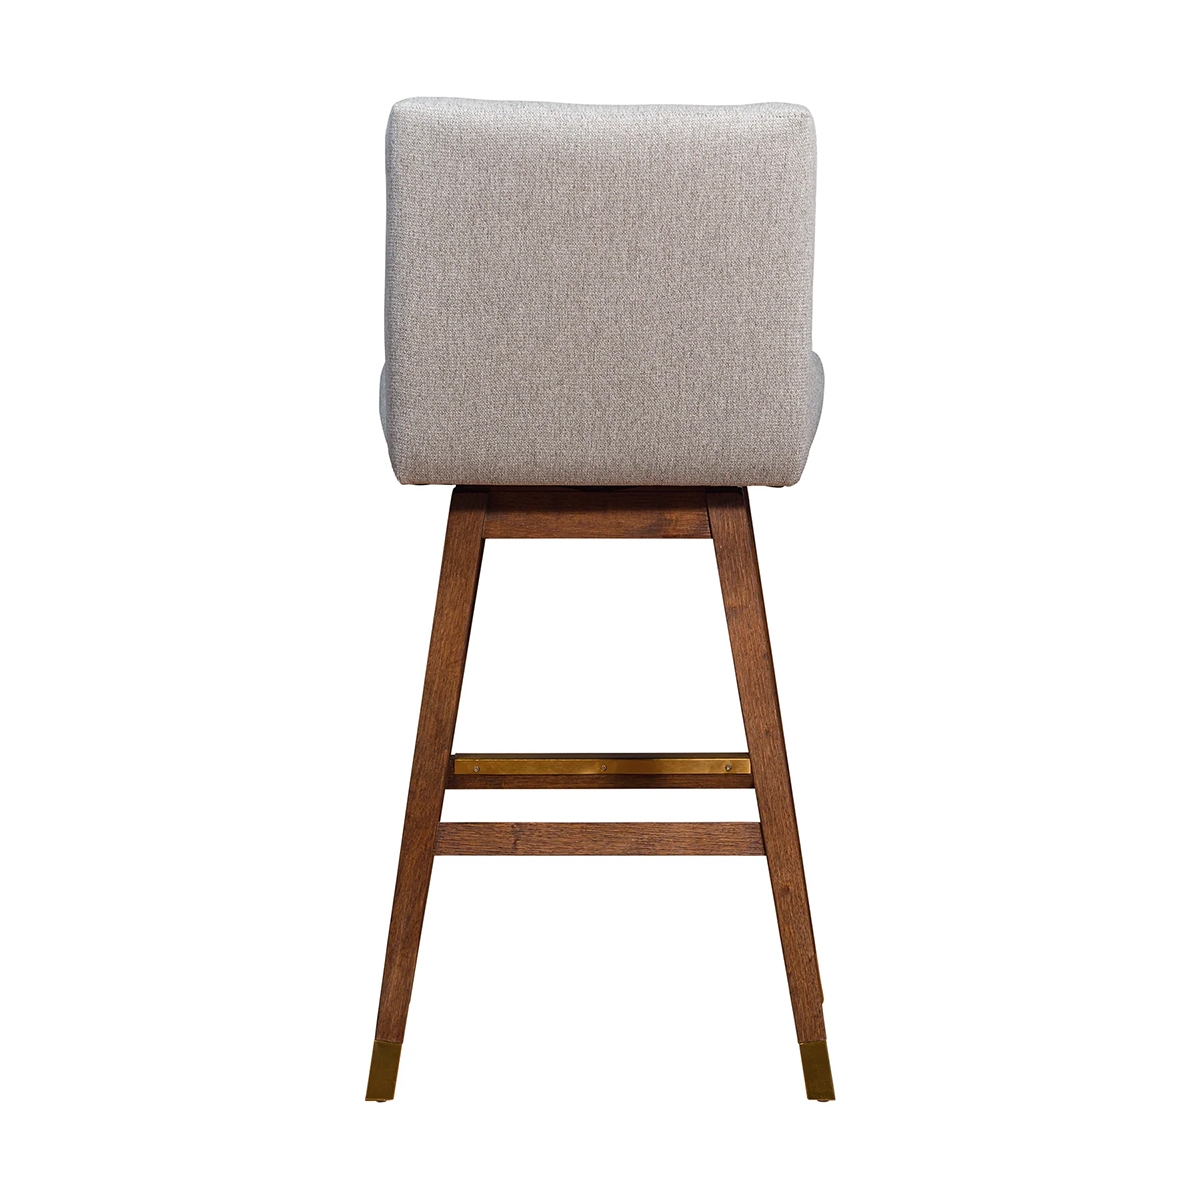 Picture of ISABELLA BROWN OAK AND TAUPE 26" COUNTER STOOL